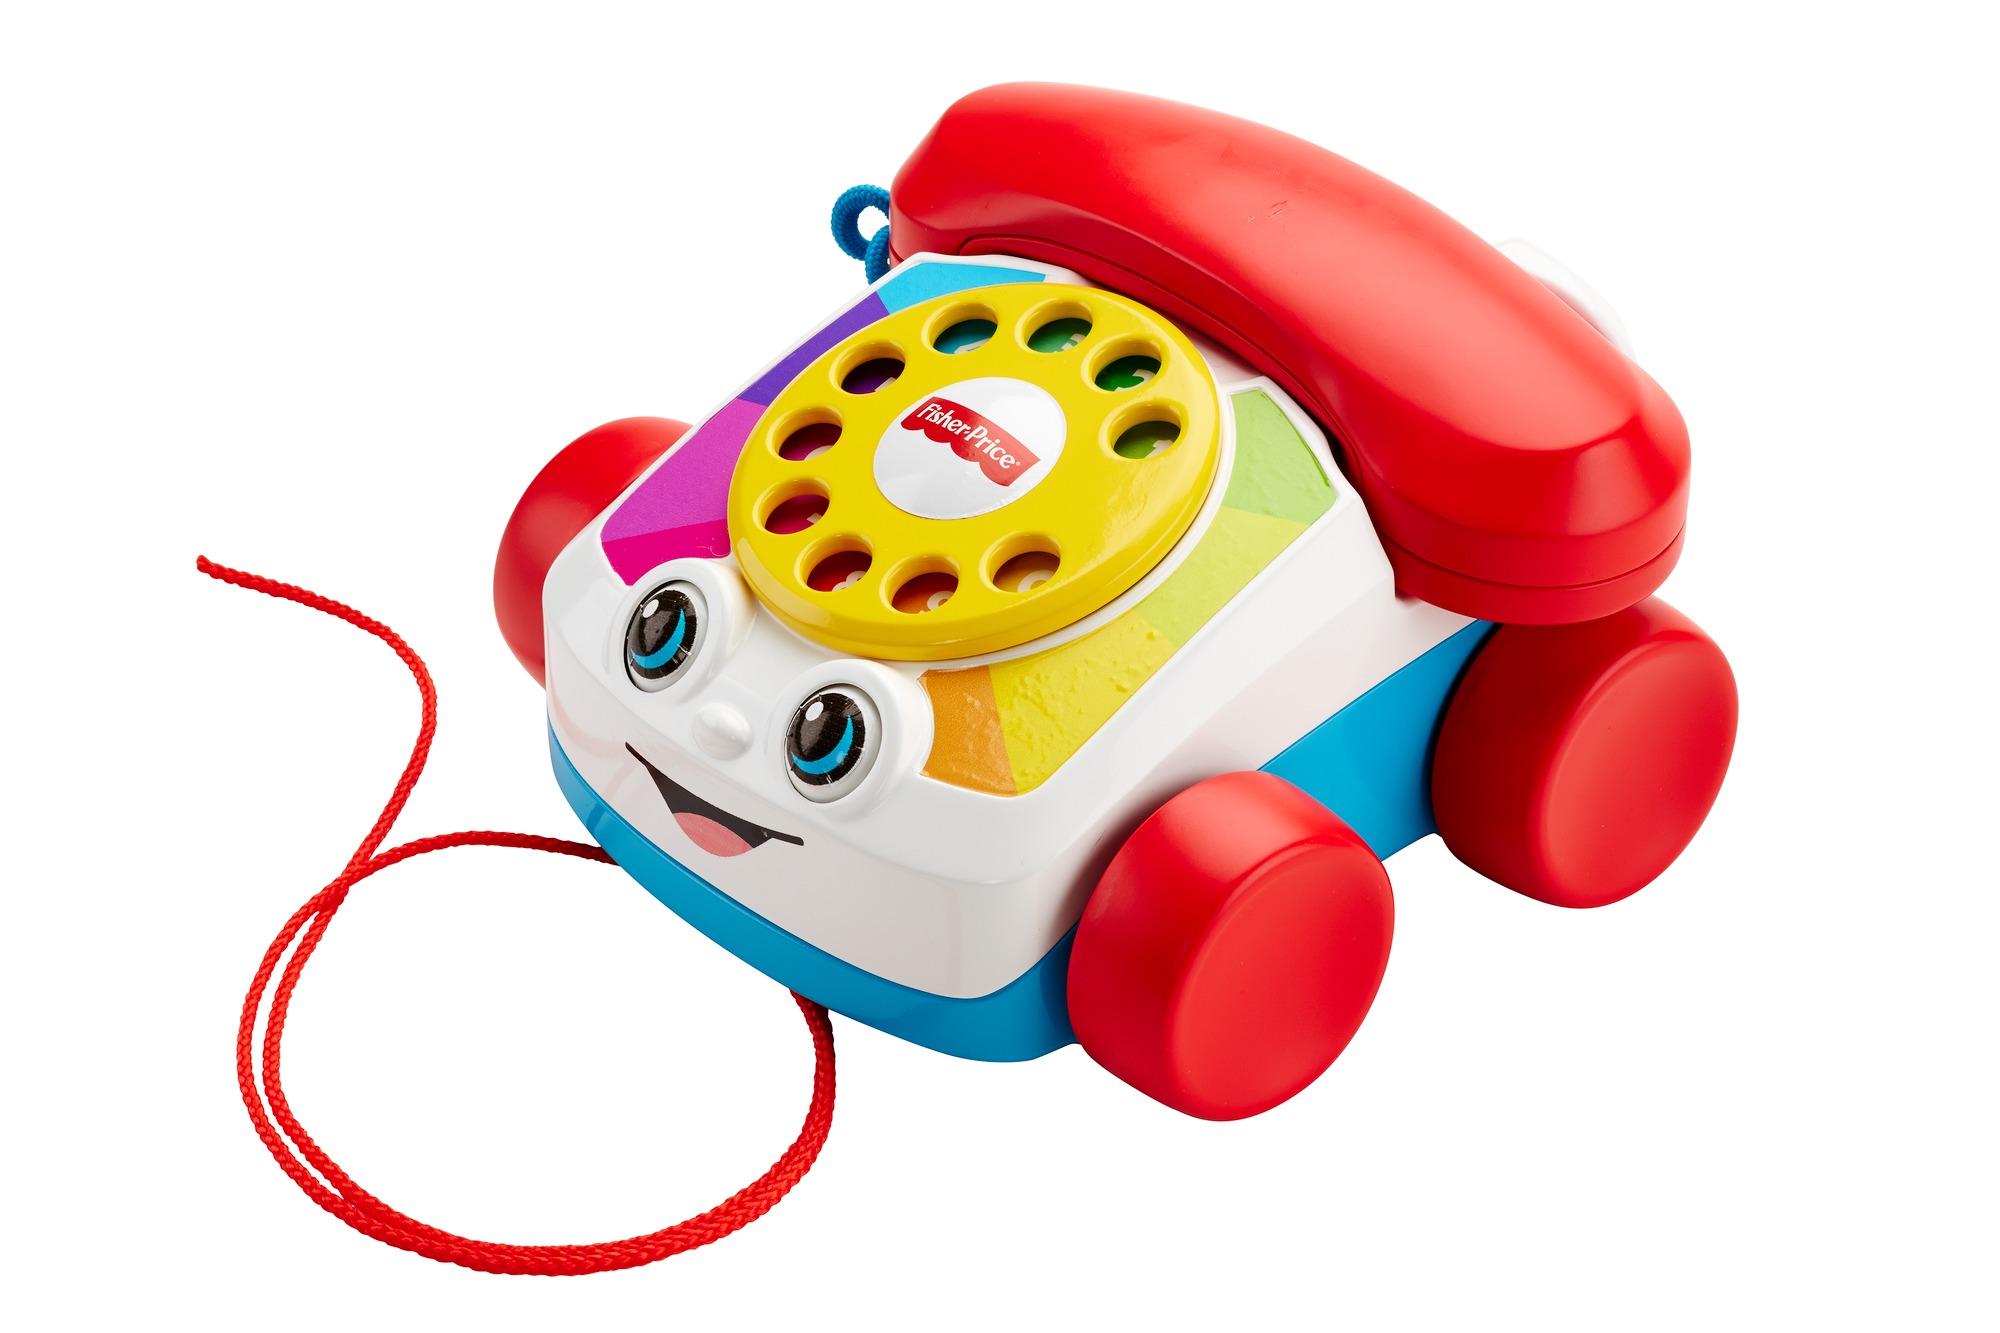 Fisher-Price Chatter Telephone Baby and Toddler Pull Toy Phone with Rotary Dial - image 1 of 6